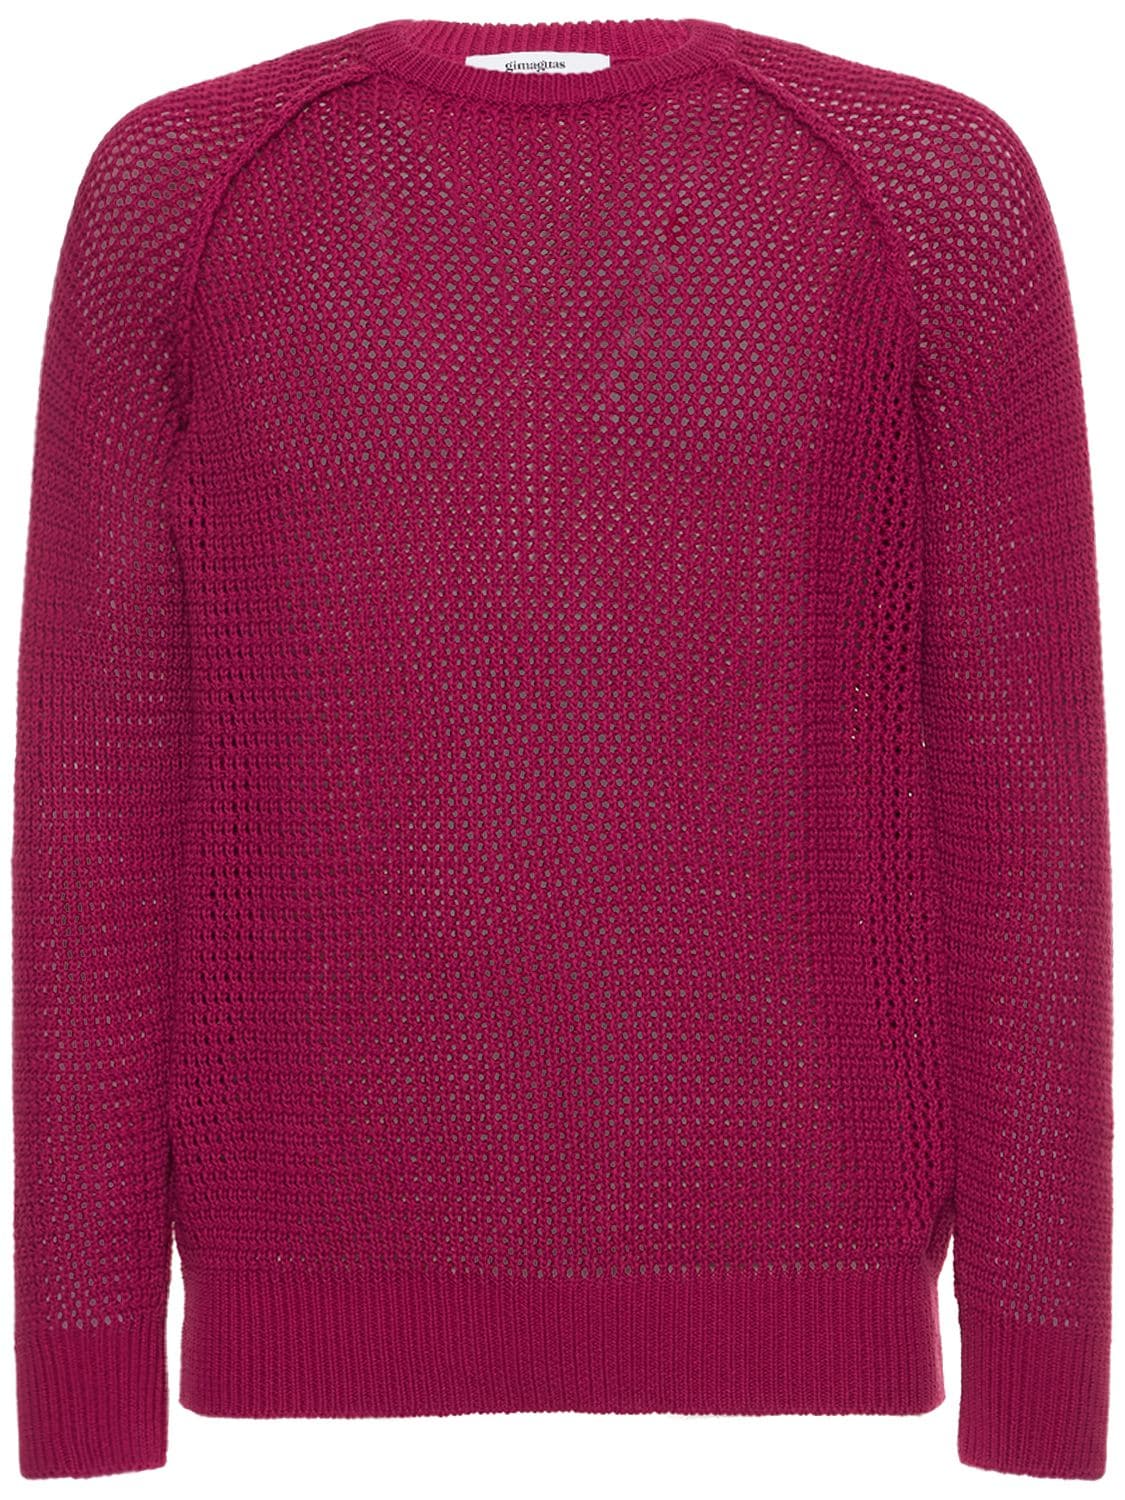 GIMAGUAS ROSSO COTTON KNIT SWEATER